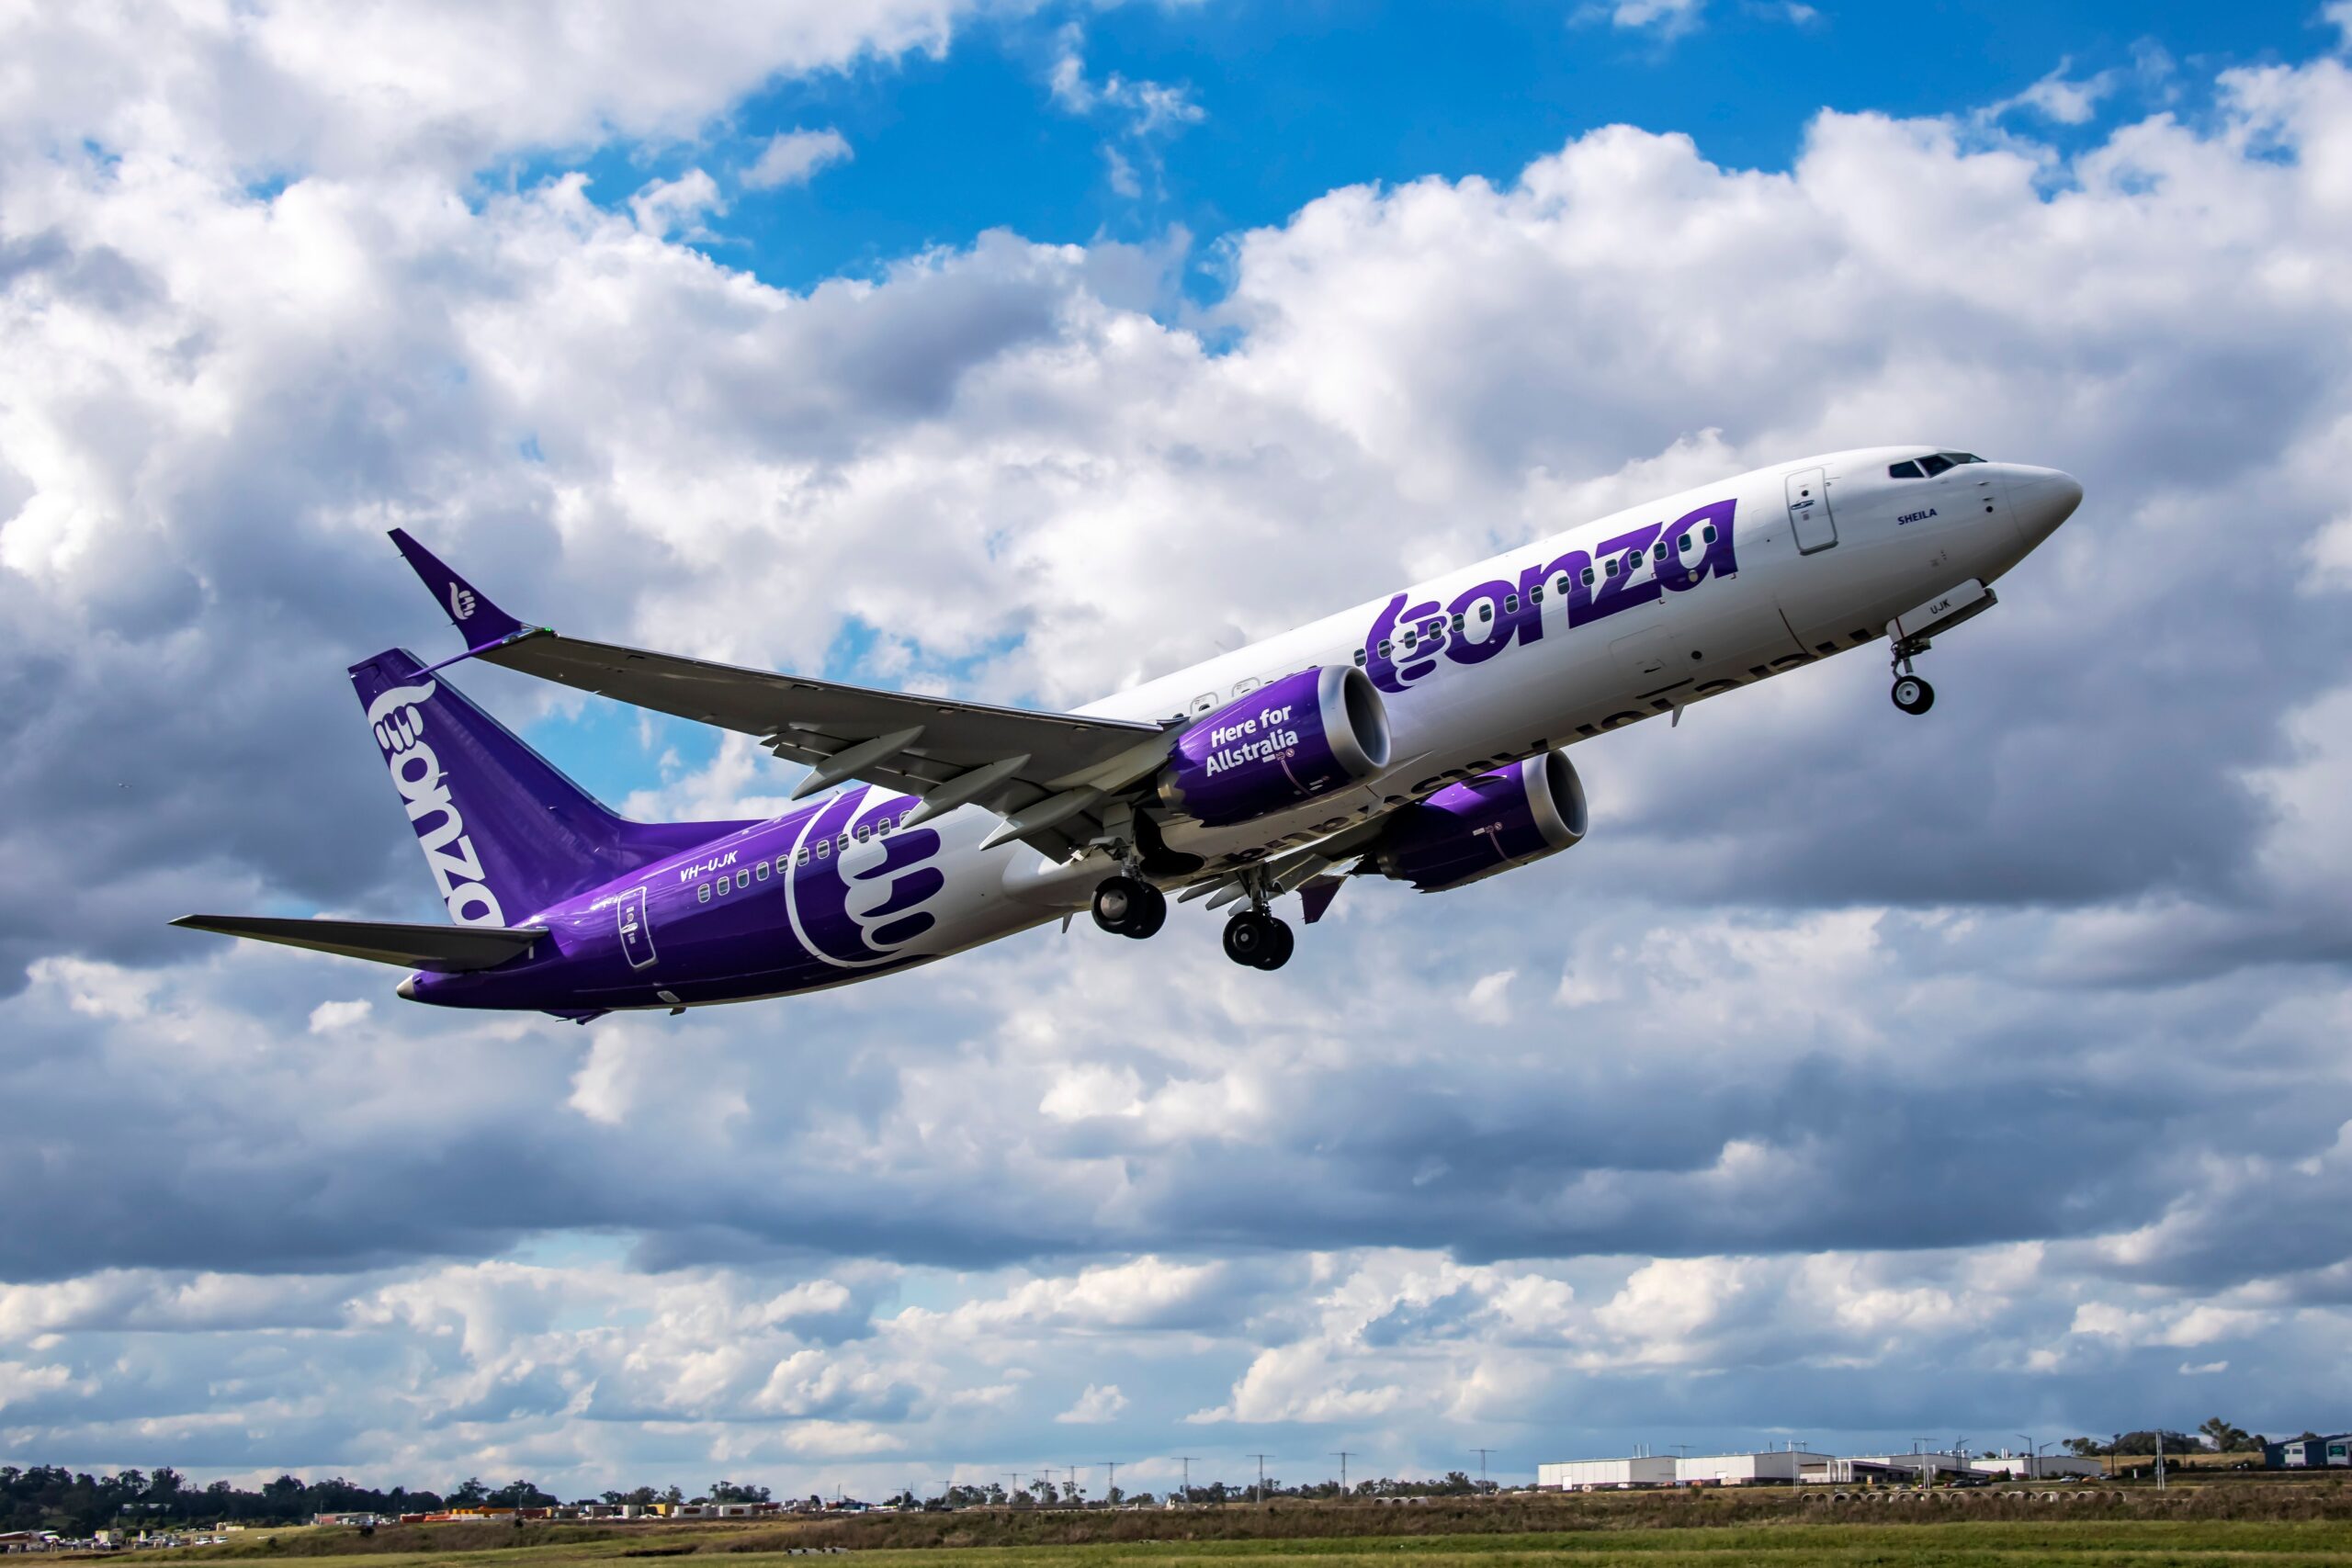 Bonza Airlines Enters Voluntary Administration